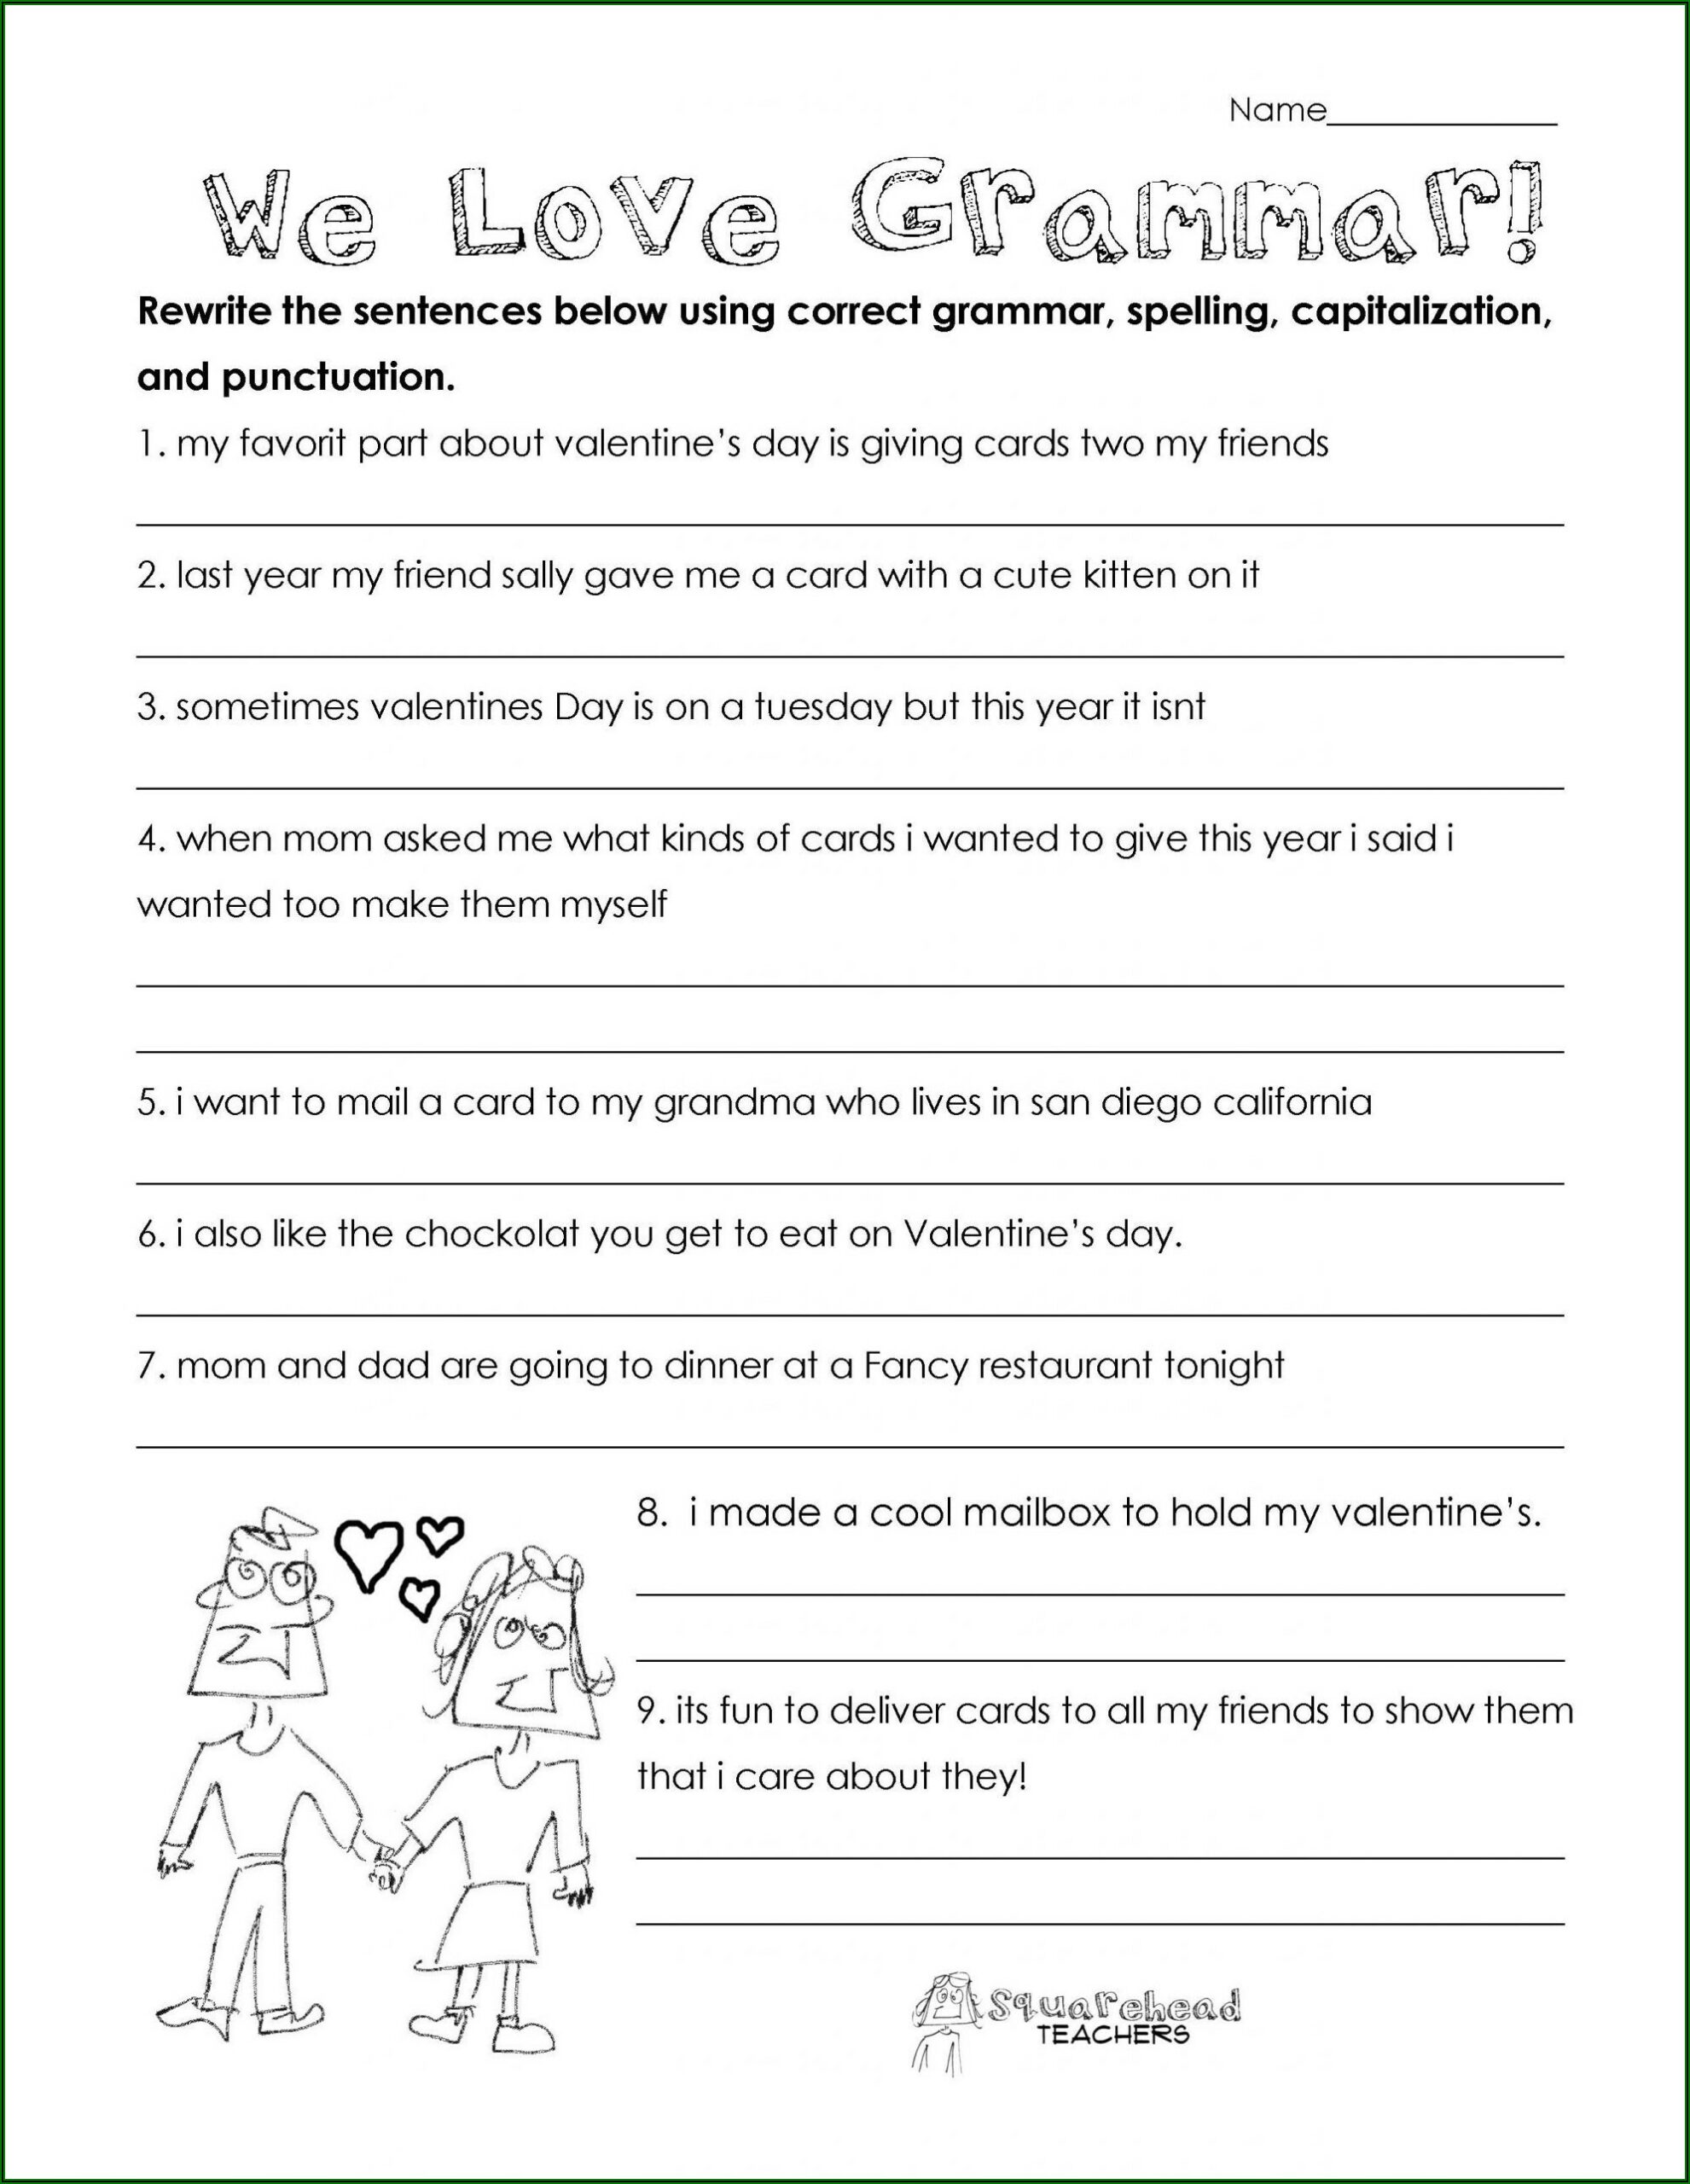 Grade 4 English Worksheets Caps Worksheet Resume Template Collections aYPGrG6AEy